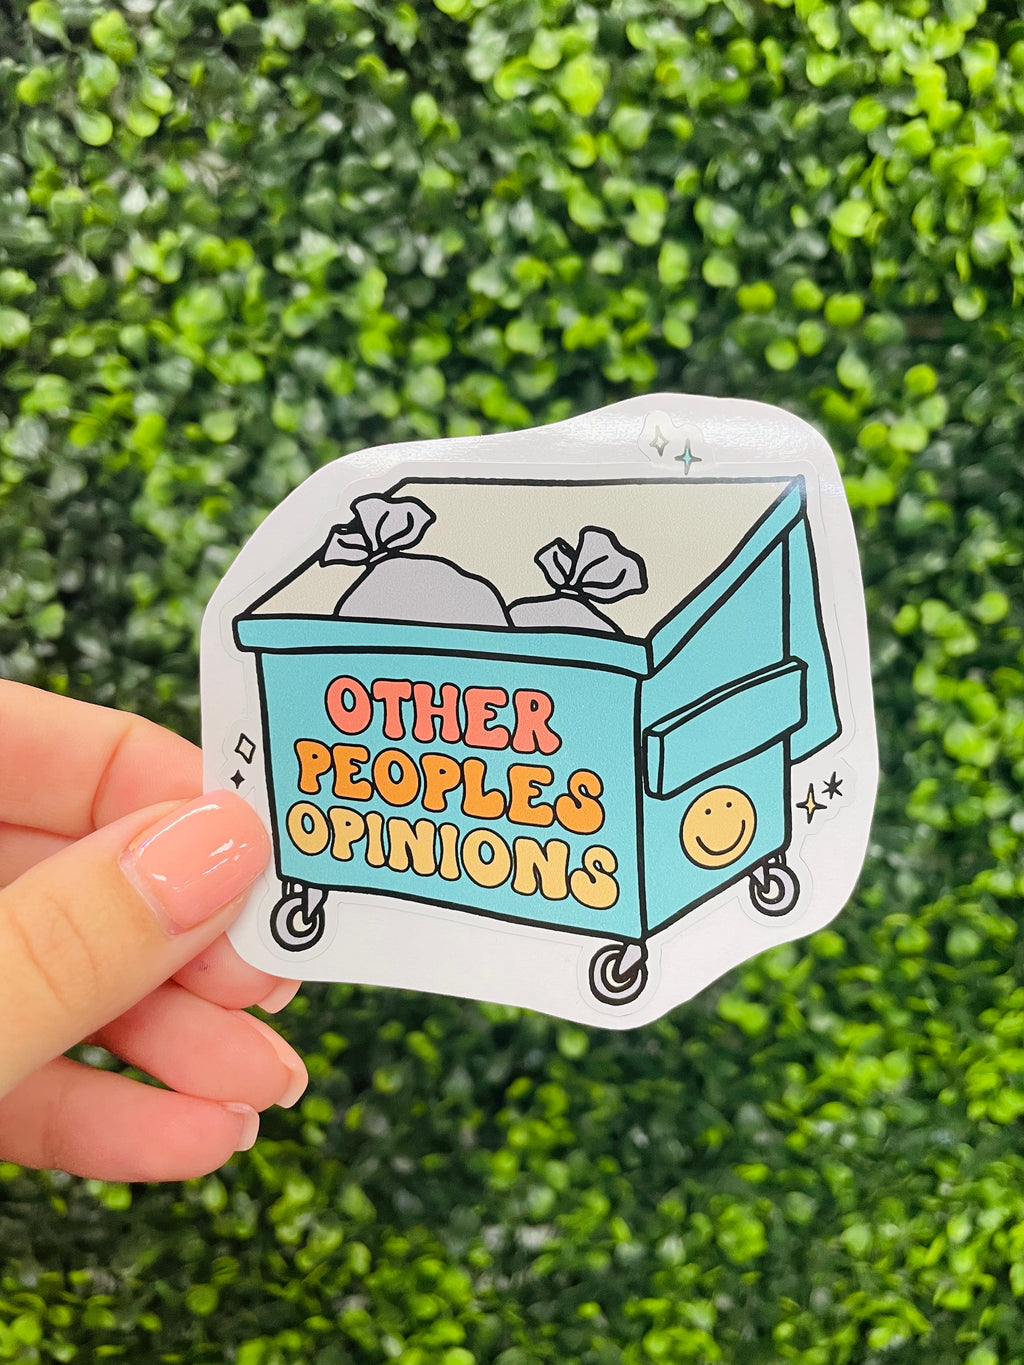 Make a statement with this Trash Other People's Opinions Sticker decal! Featuring a dumpster filled with bubble font, this sticker is perfect for slapping on your water bottle or laptop to let everyone know what you really think. Ditch the drama and show the world what you believe in!